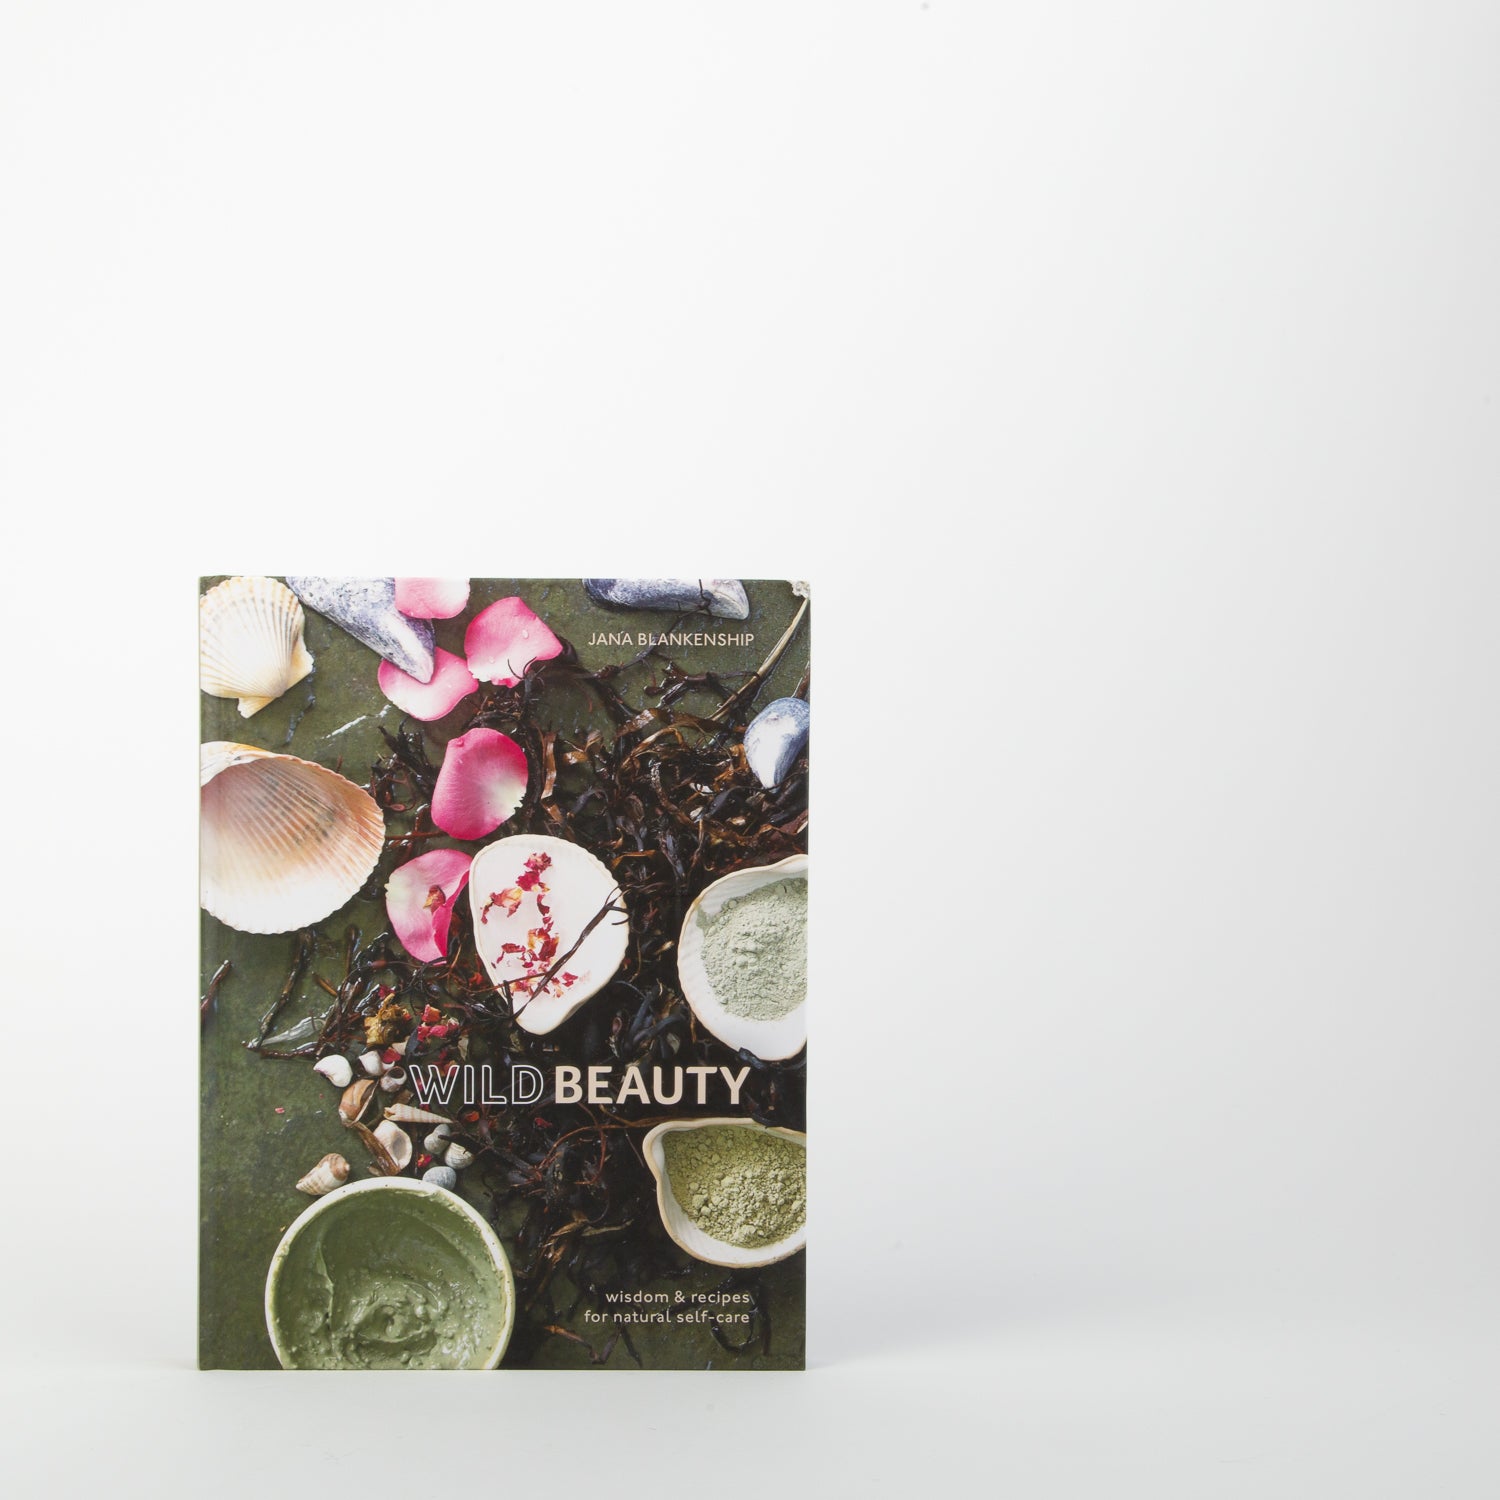 Wild Beauty: Wisdom & Recipe for Natural Self-Care by Penguin Books at Secret Location